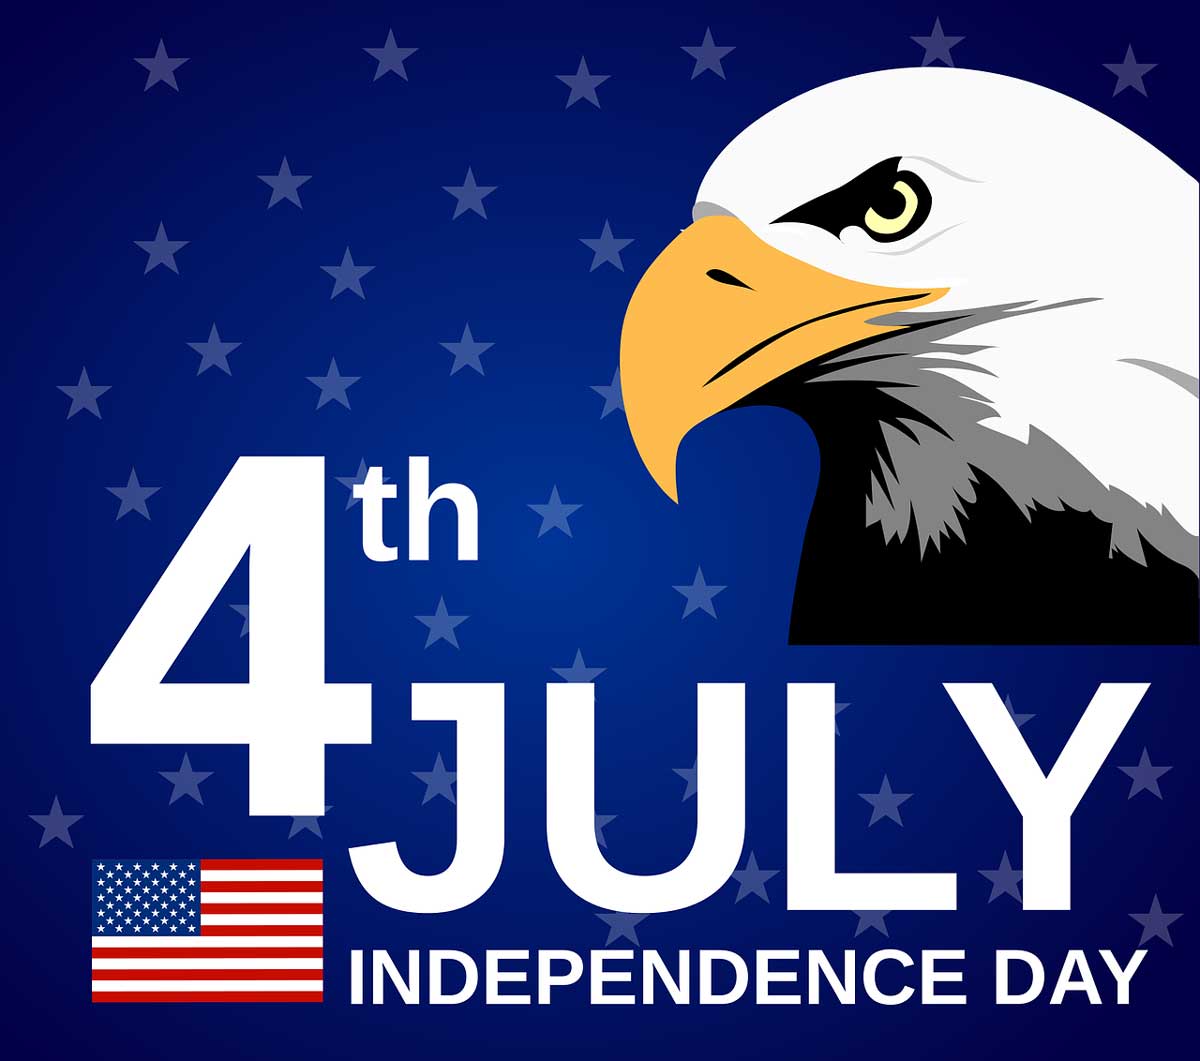 eagle graphic on deep blue says 4th of july independence day in white letters with american flag.